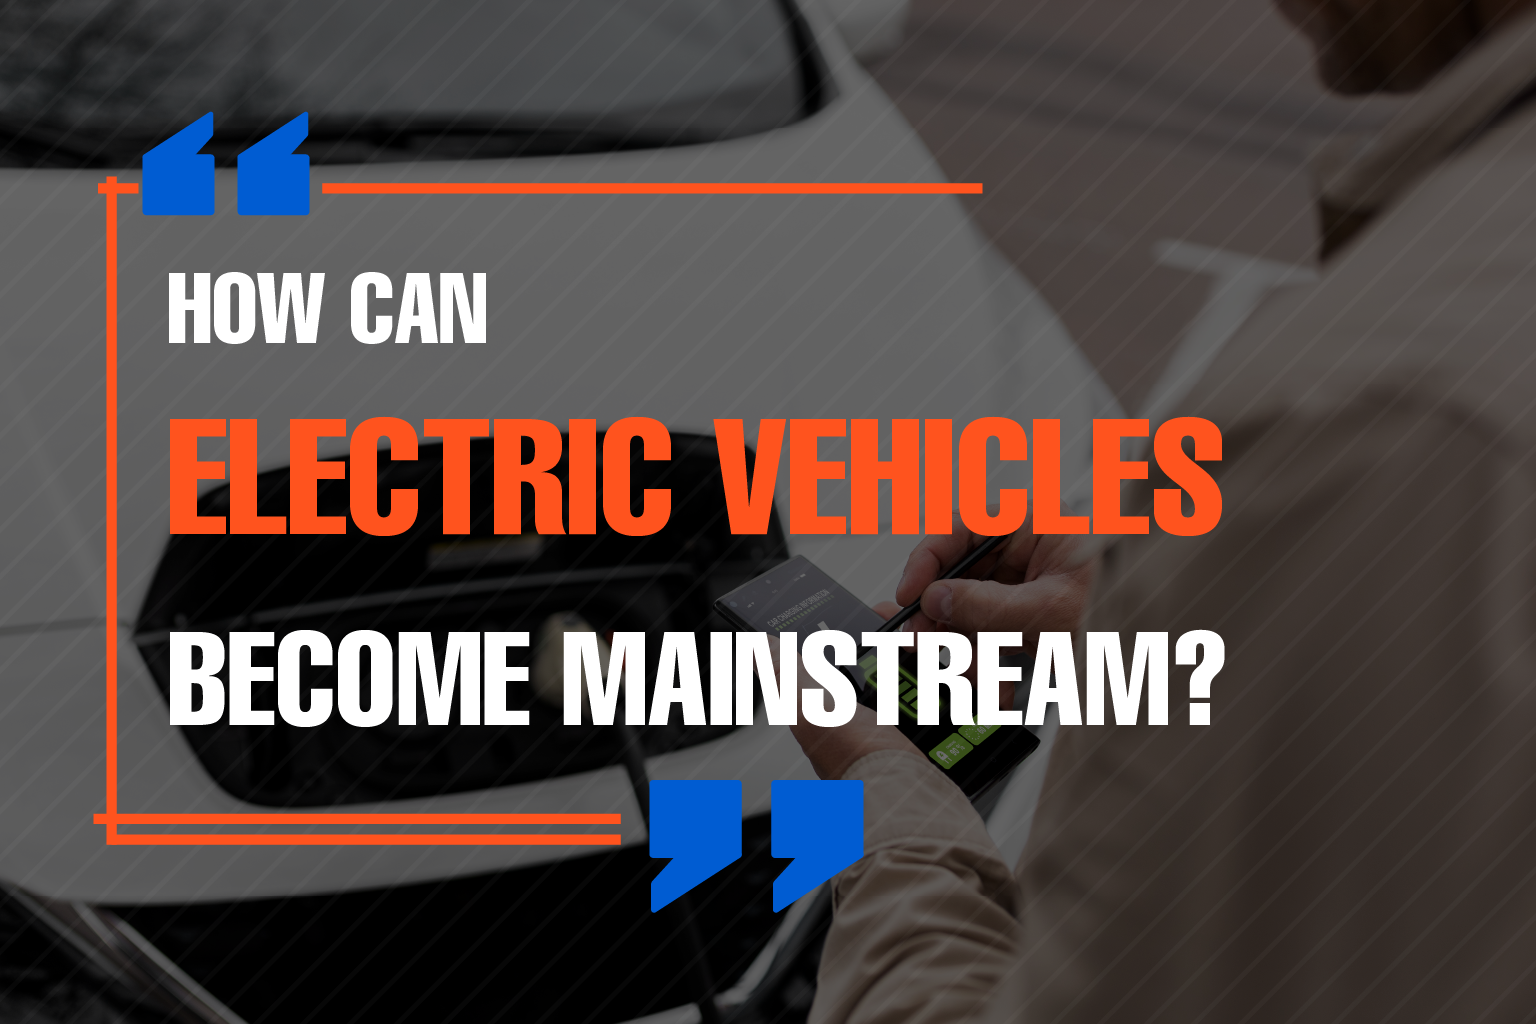 How can Electric Vehicles become mainstream?